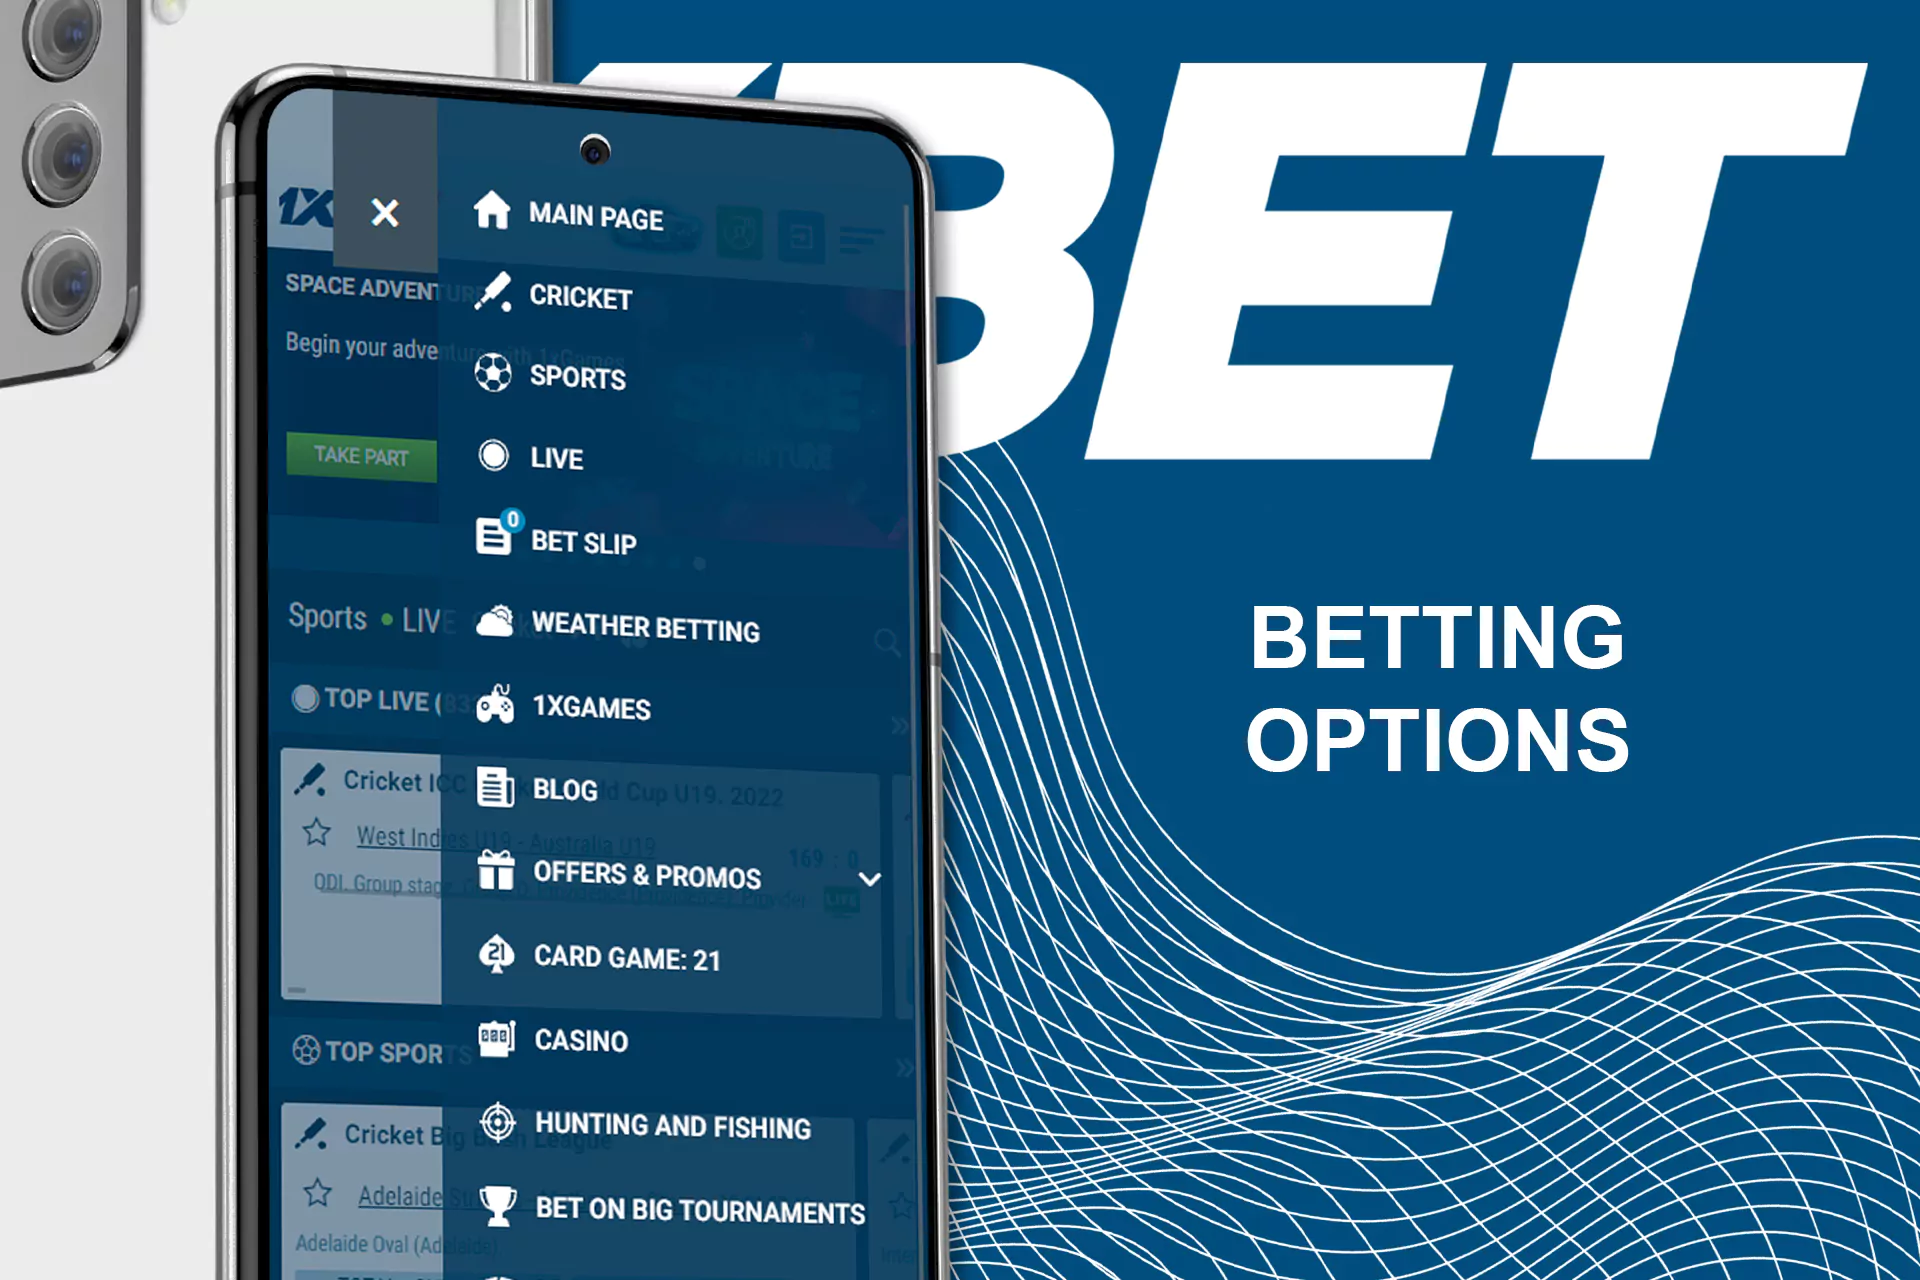 At 1xBet, there are at least three betting options available for the users.